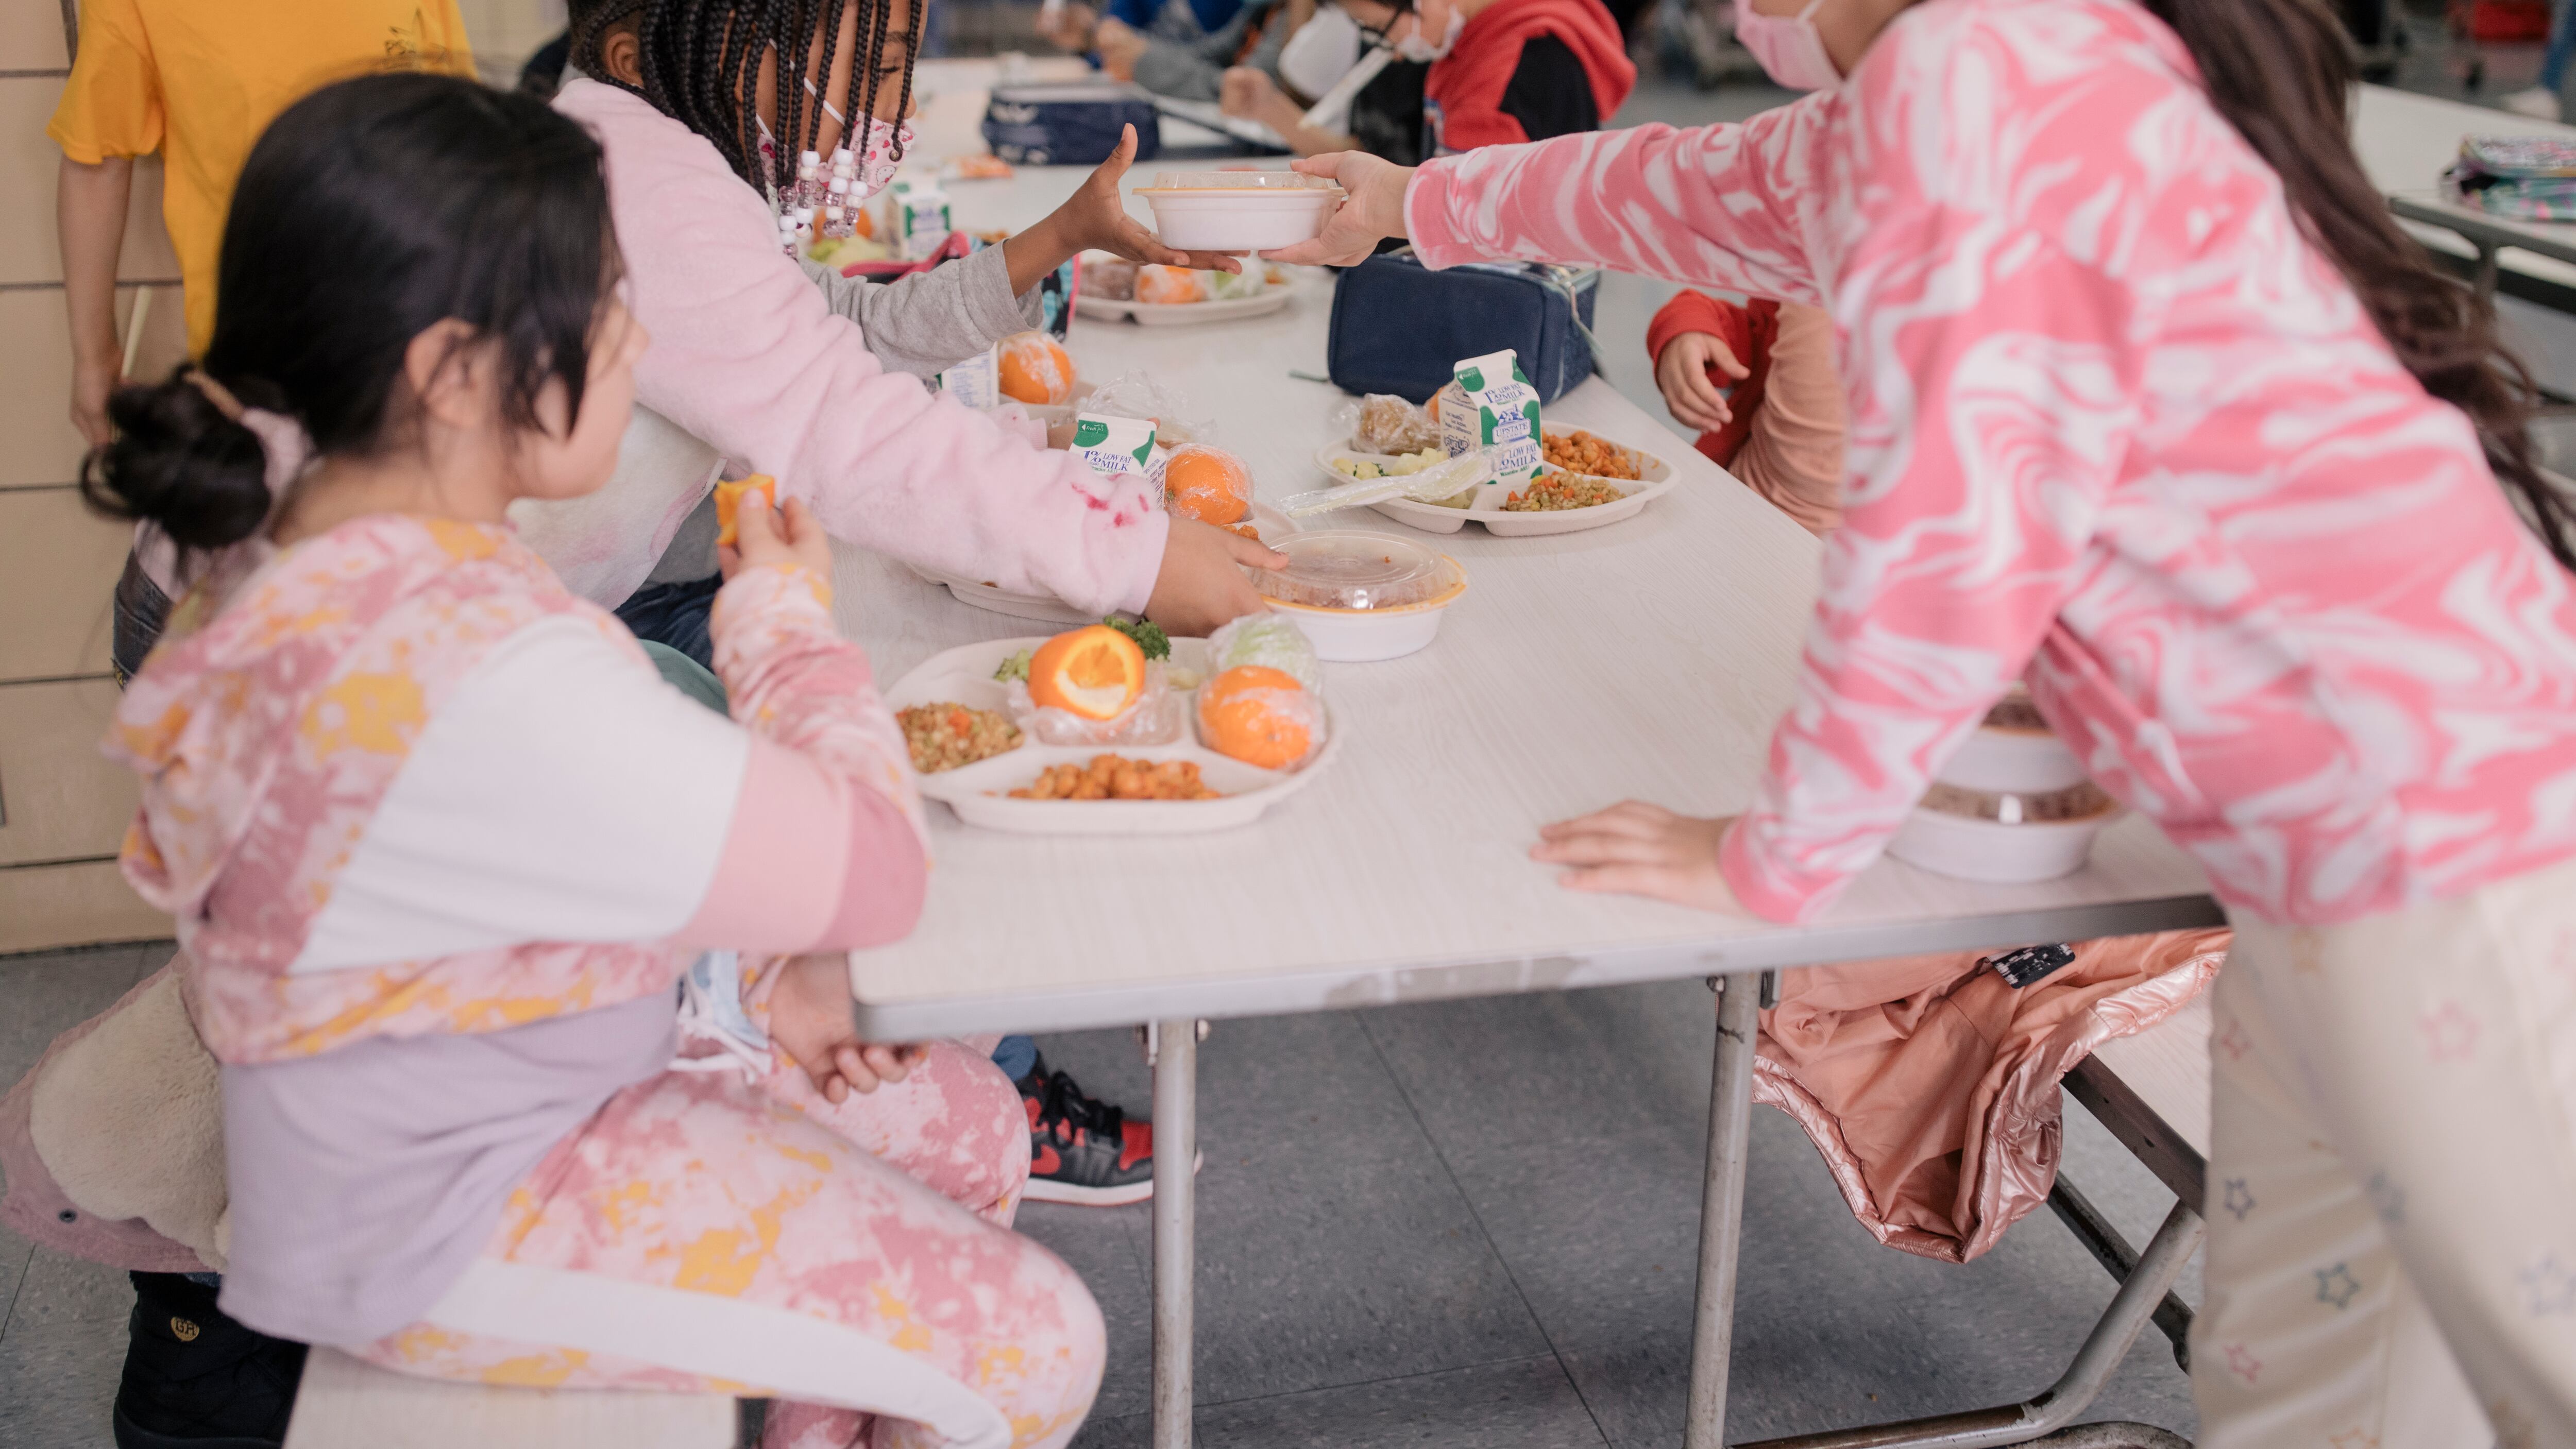 A group of girls, all wearing pink, eat together in a school cafeteria.